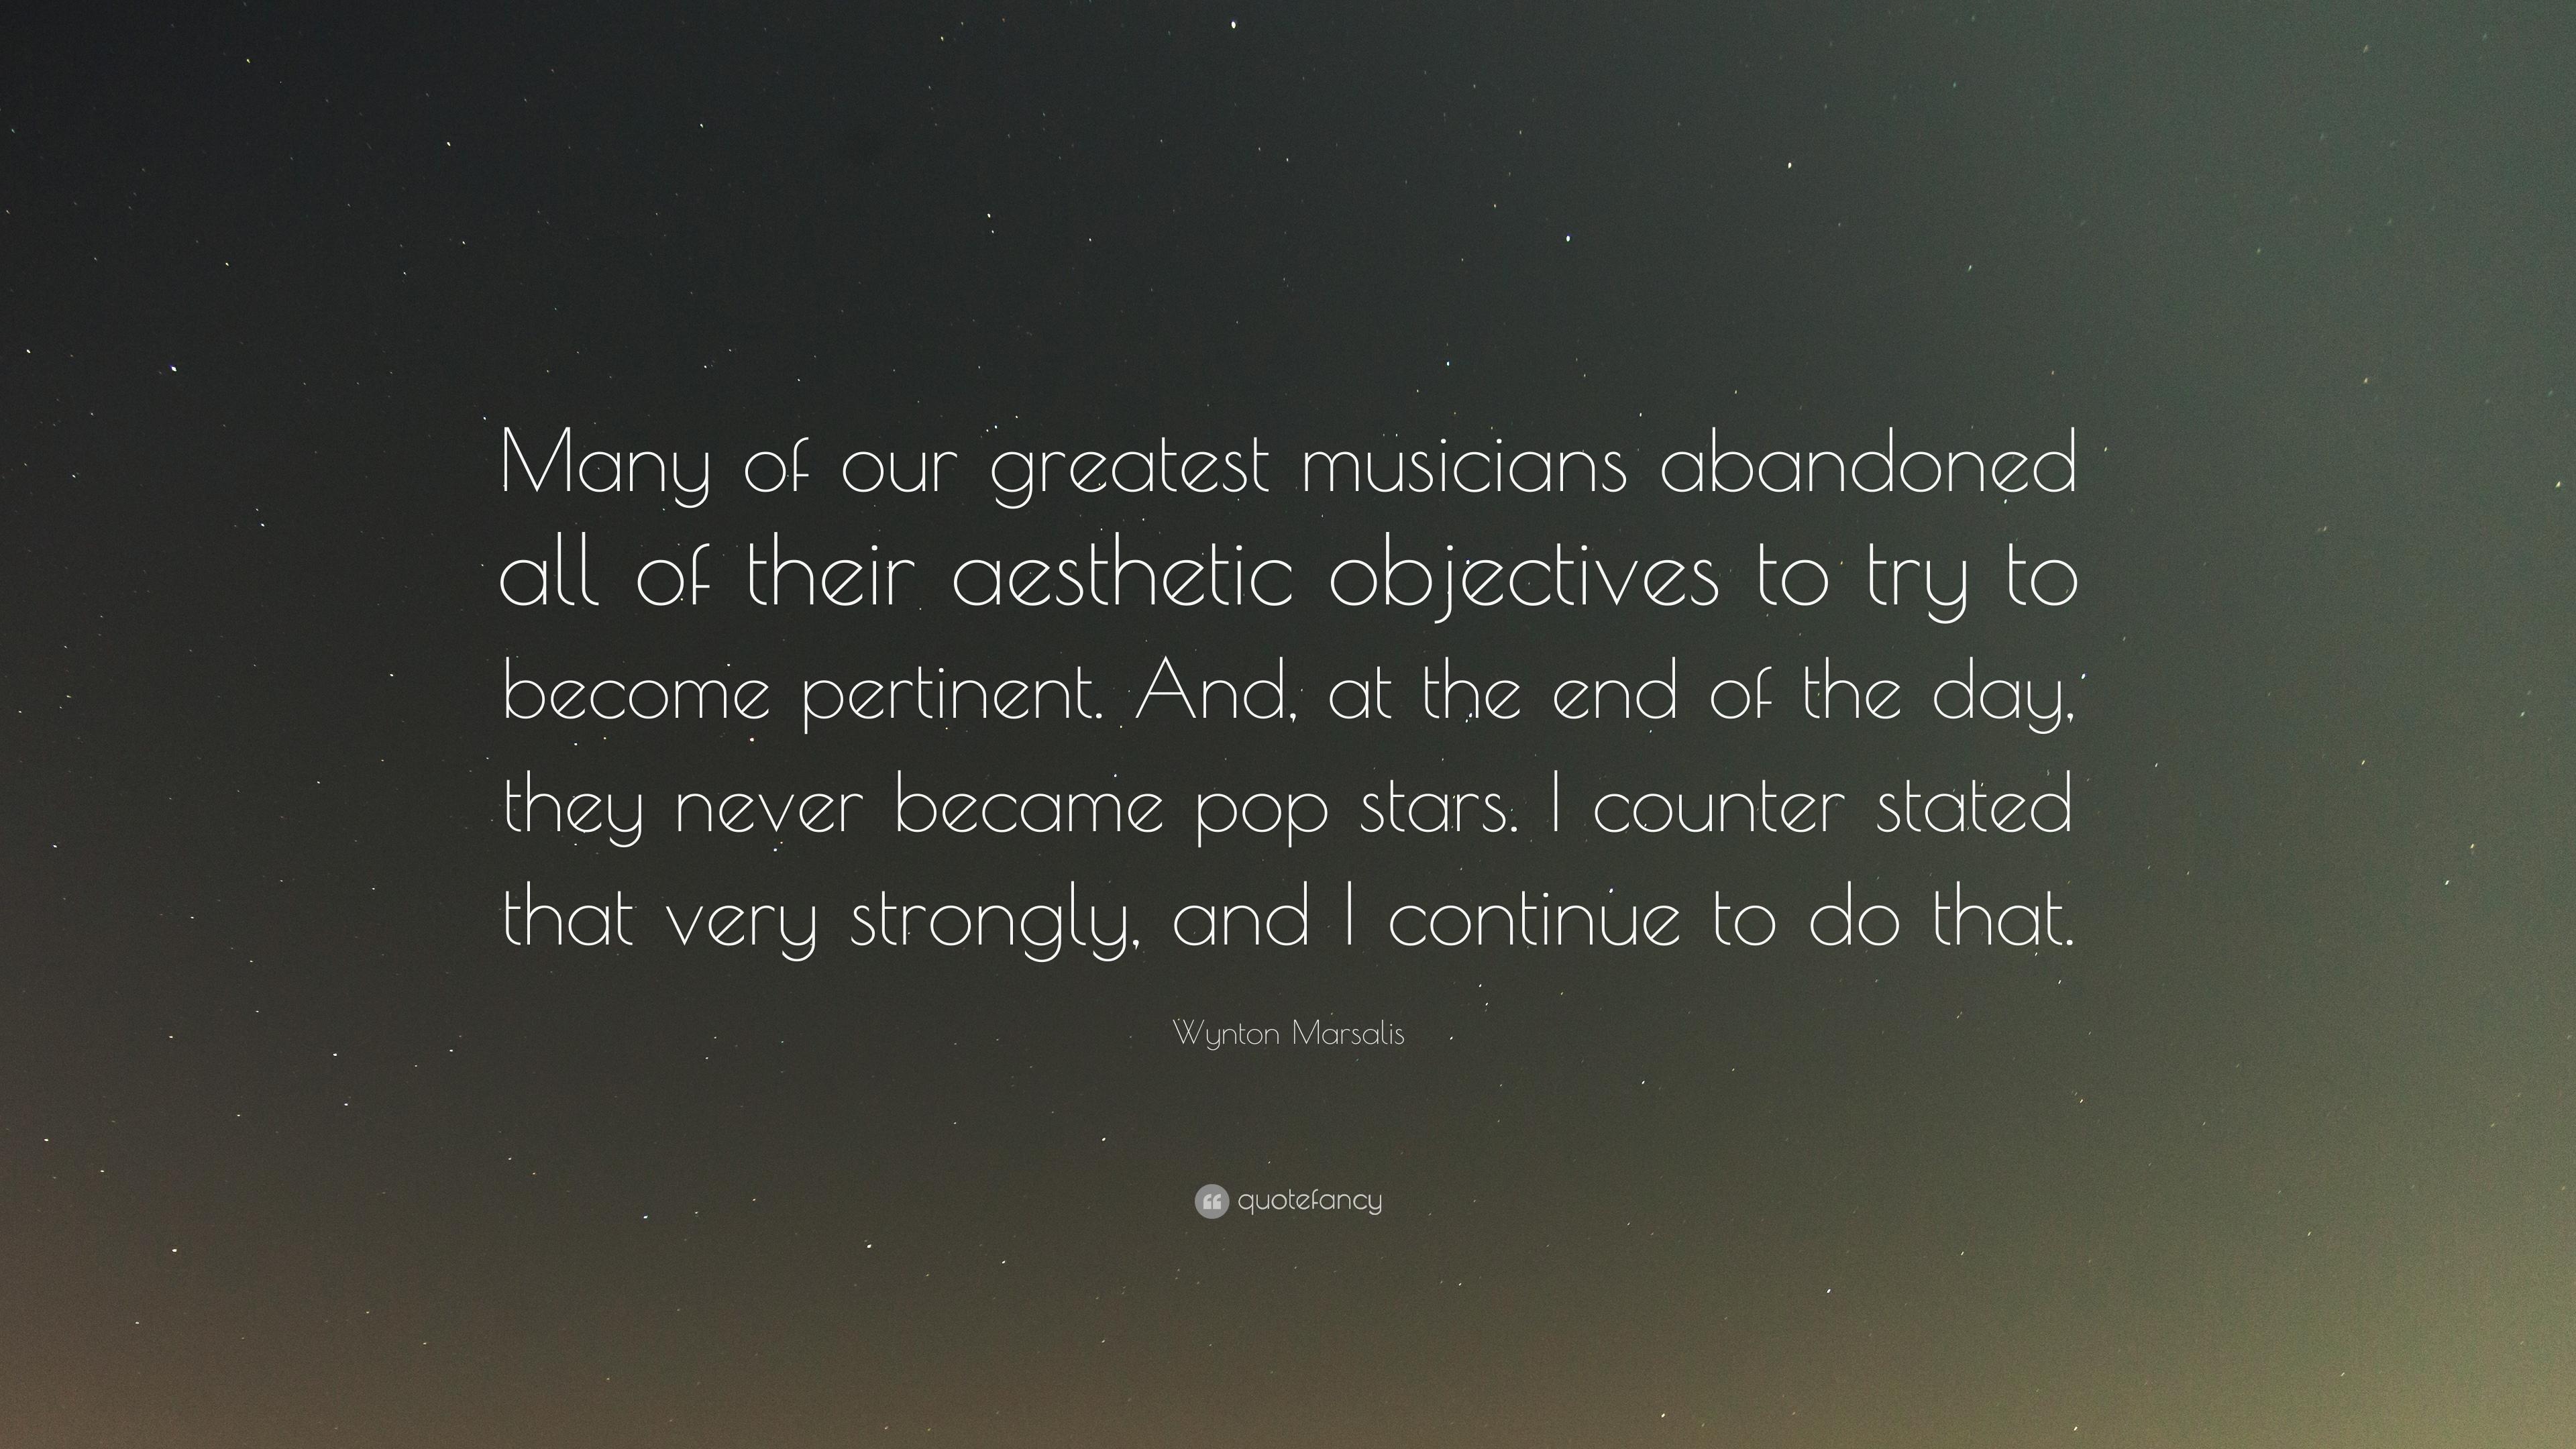 Wynton Marsalis Quote: “Many of our greatest musicians